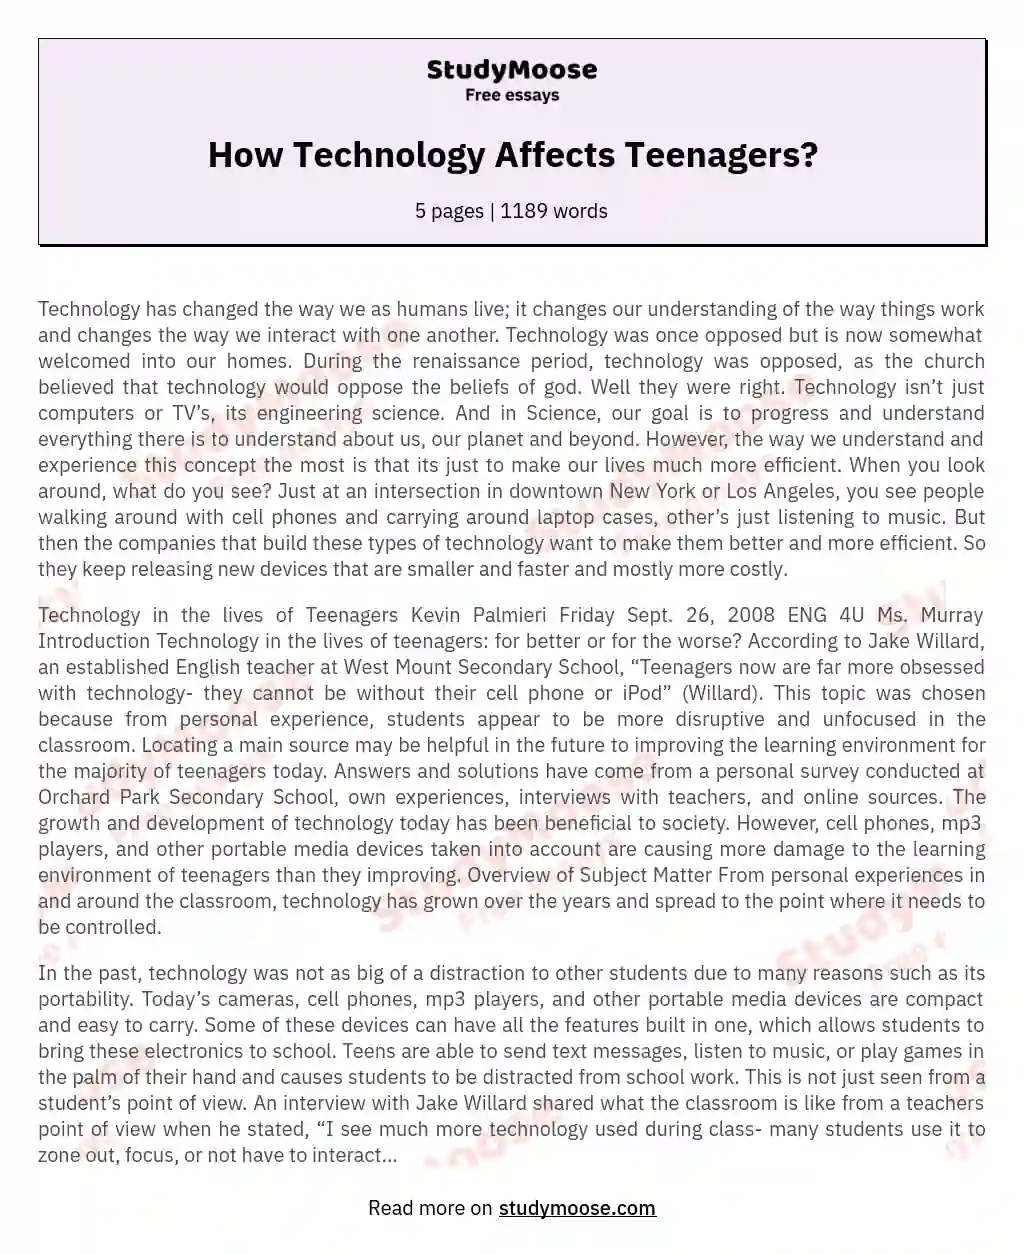 How Technology Affects Teenagers?